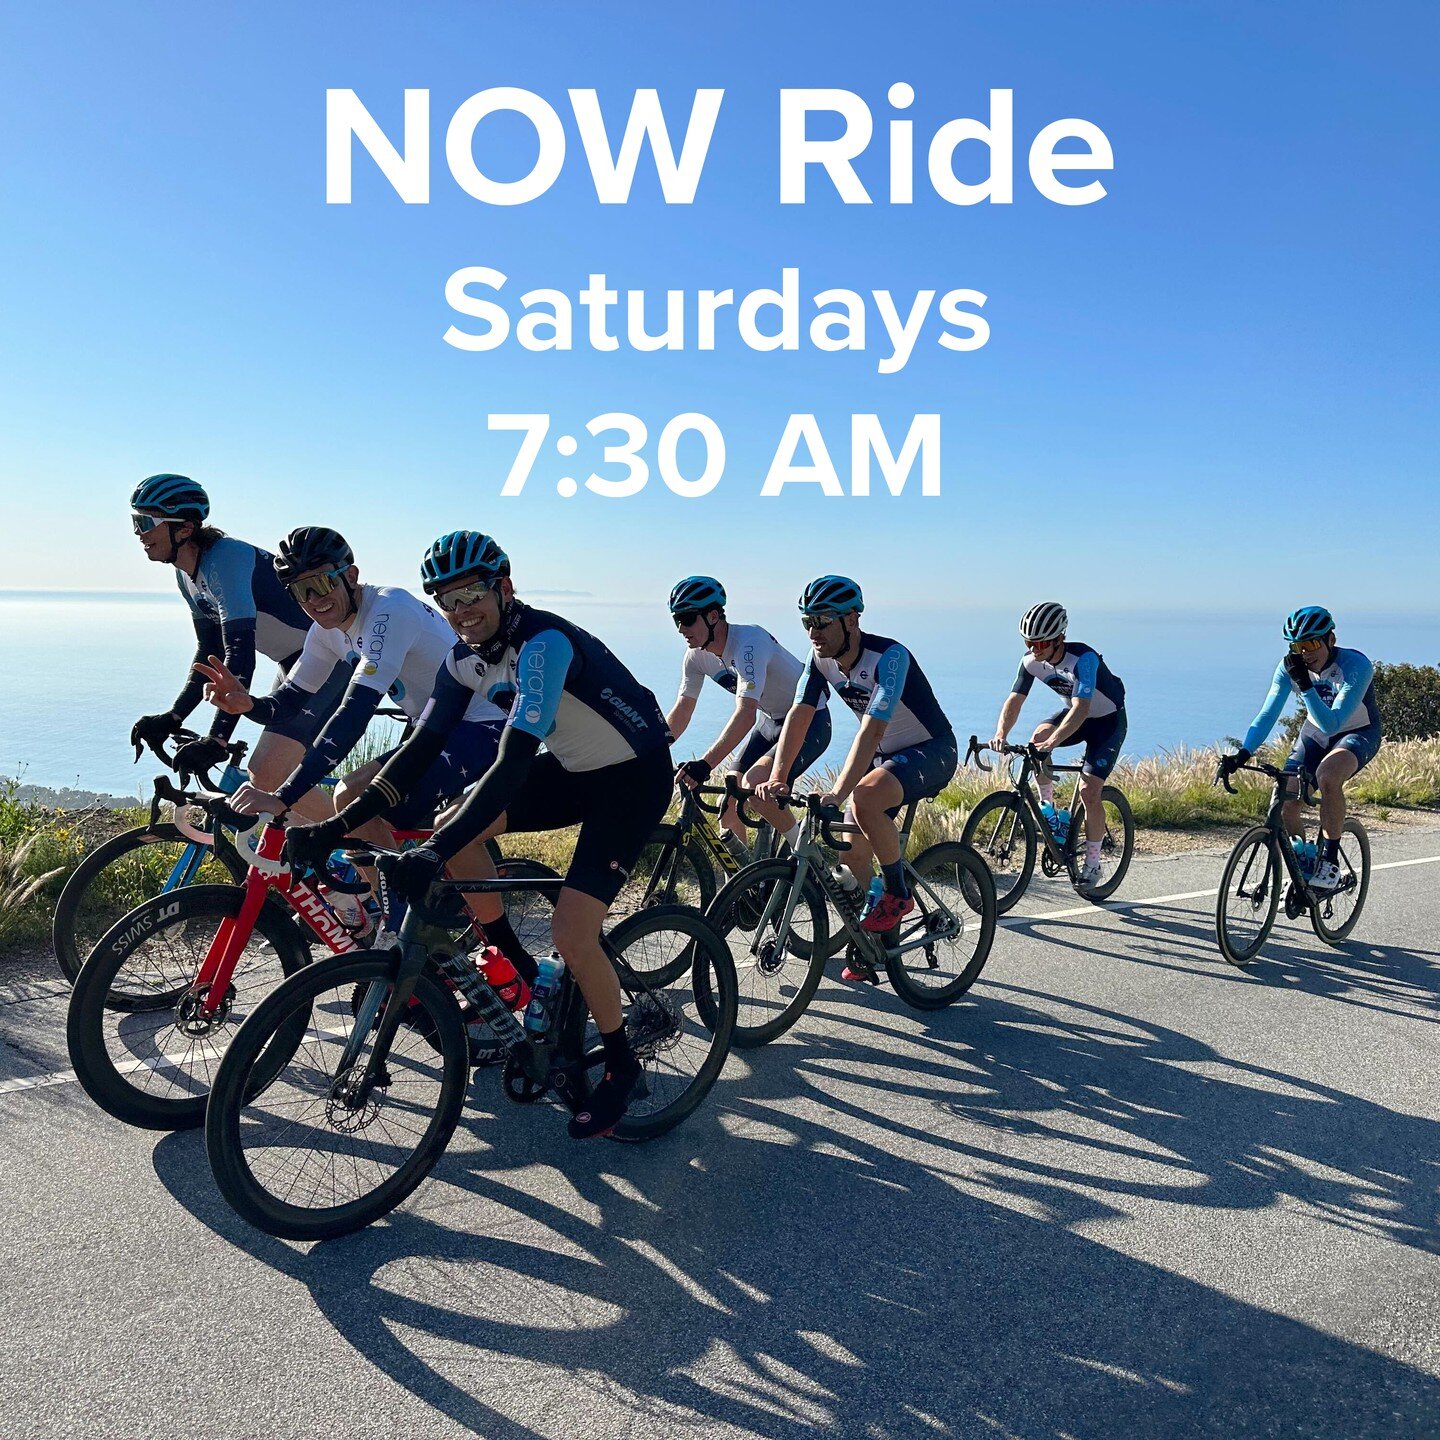 If you're not racing SLR, join us tomorrow for the NOW ride! Meet at 7th and Montana at 7:30 for a straight shot up the PCH to Trancas canyon with extra credit in the mountains. We generally keep it civil for ~10 miles until Pepperdine where attacks 